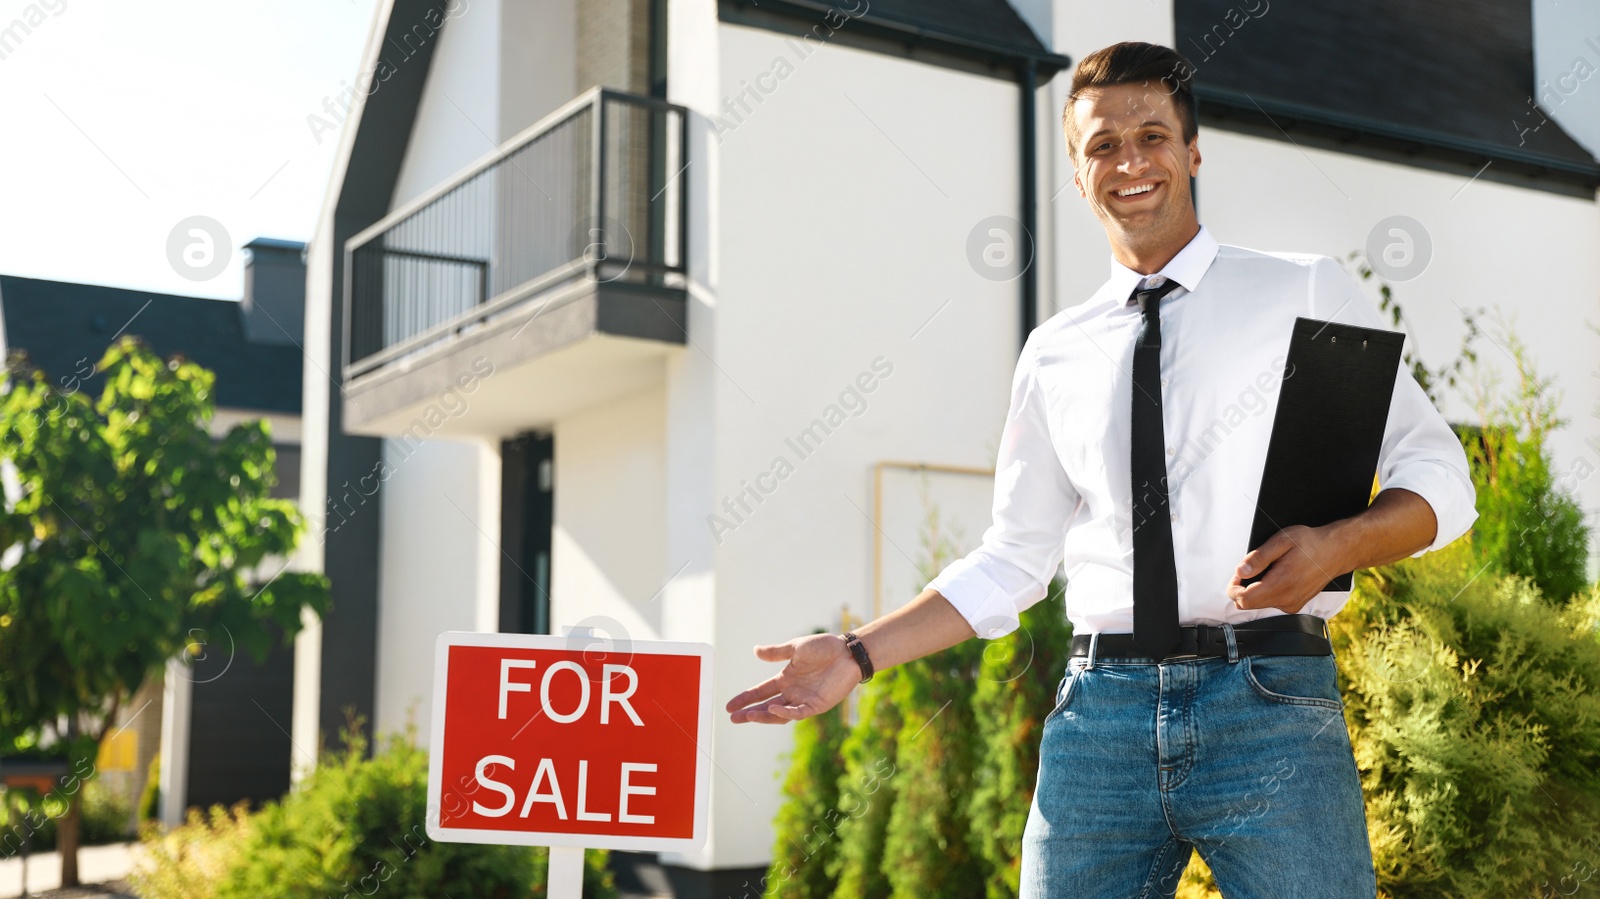 Photo of Real estate agent near red sign in front of house outdoors